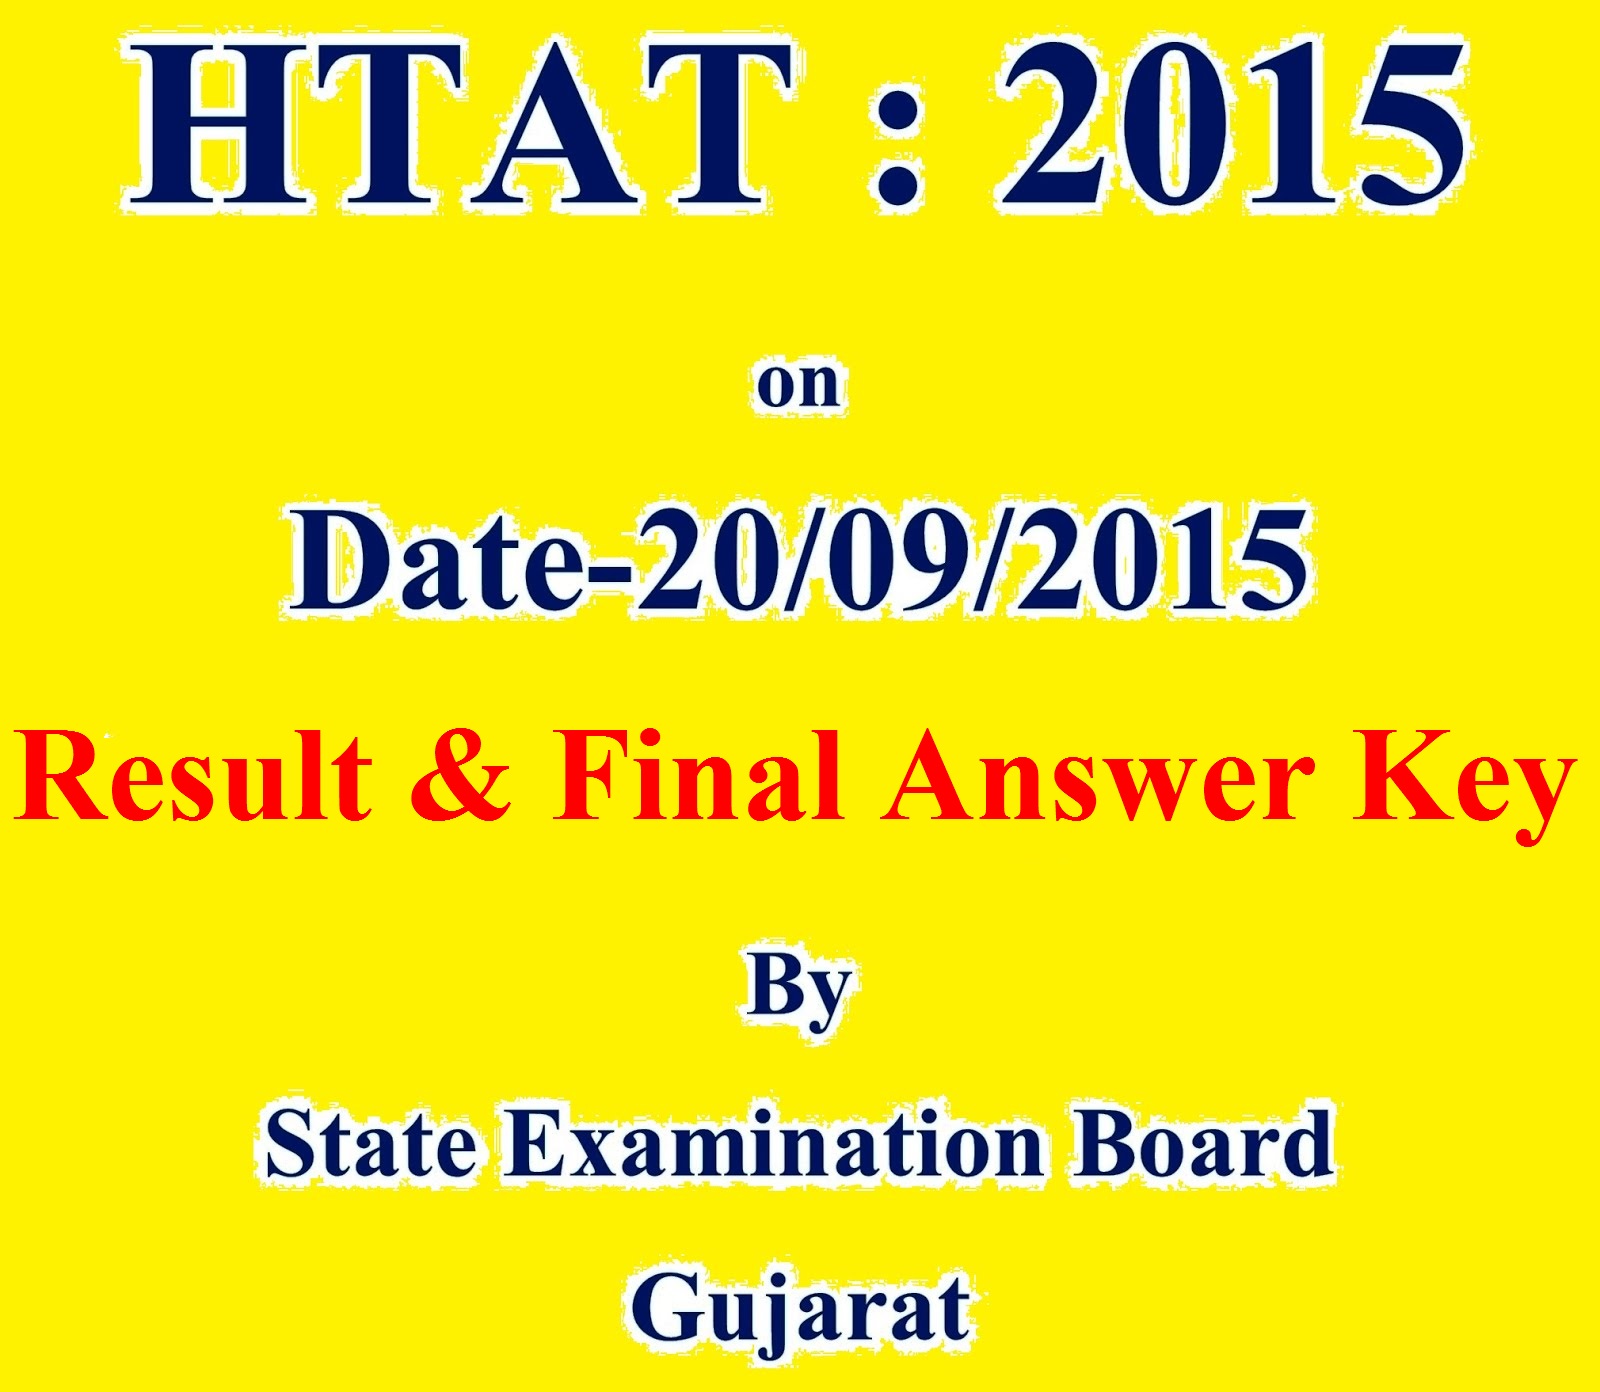 HTAT-2015 Result & Final Answer Key (Official)